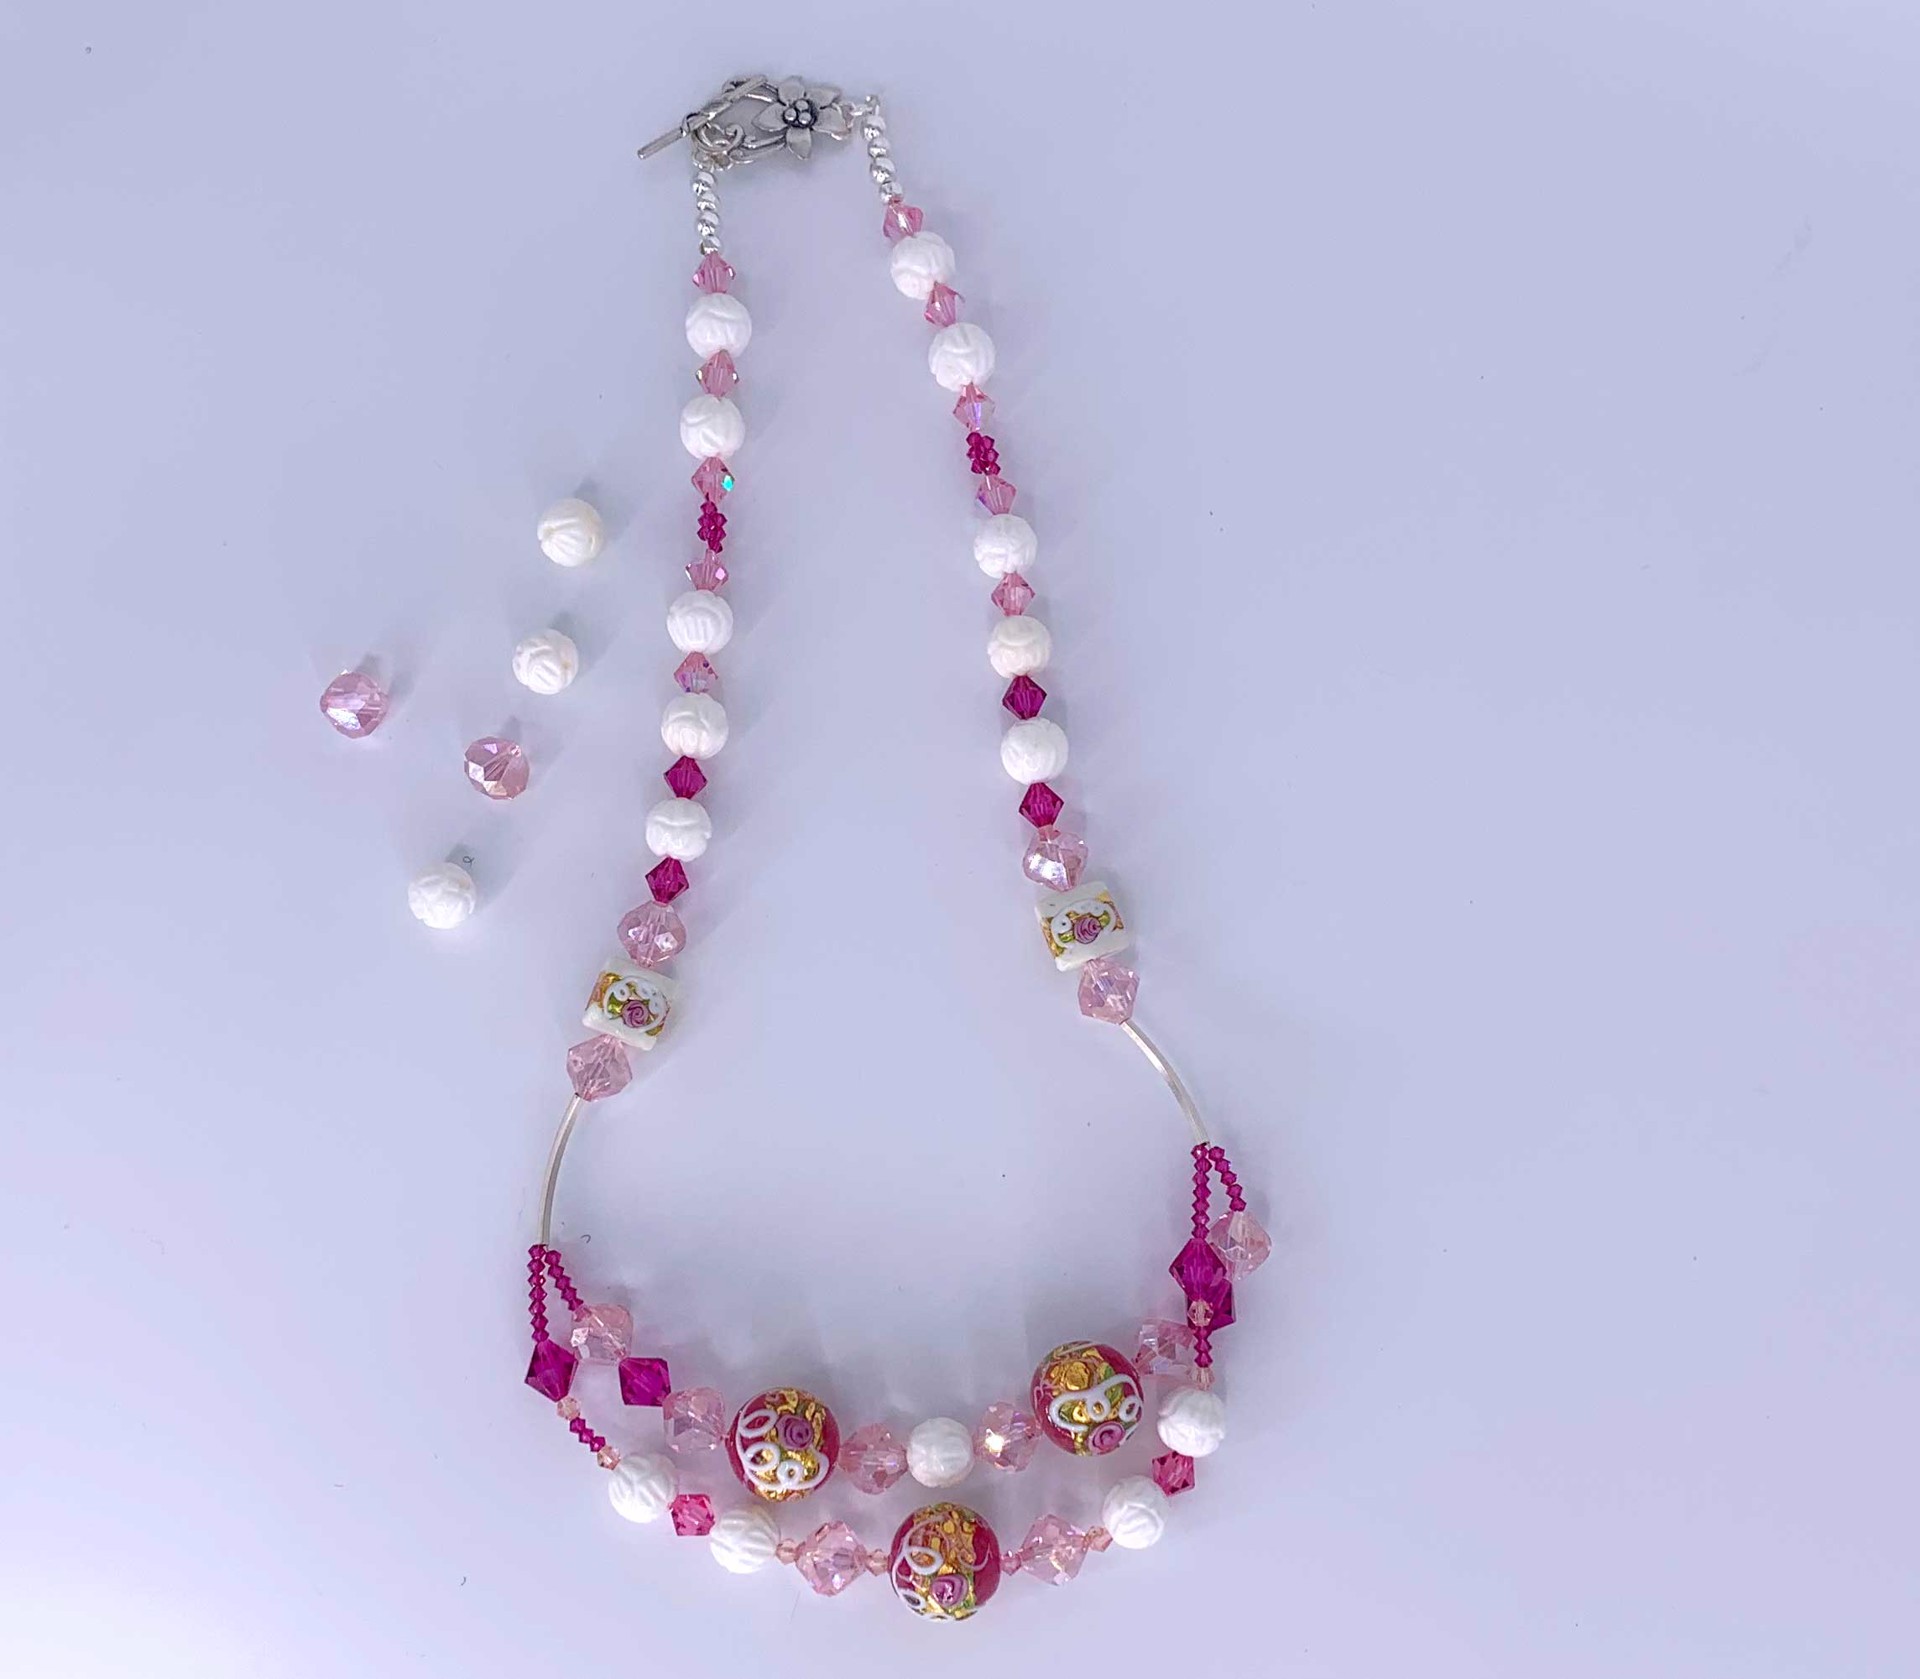 The delicately carved Tridacna shell beads, Venetian glass beads, Swarovski crystals lift this necklace to an elegant place in your wardrobe.